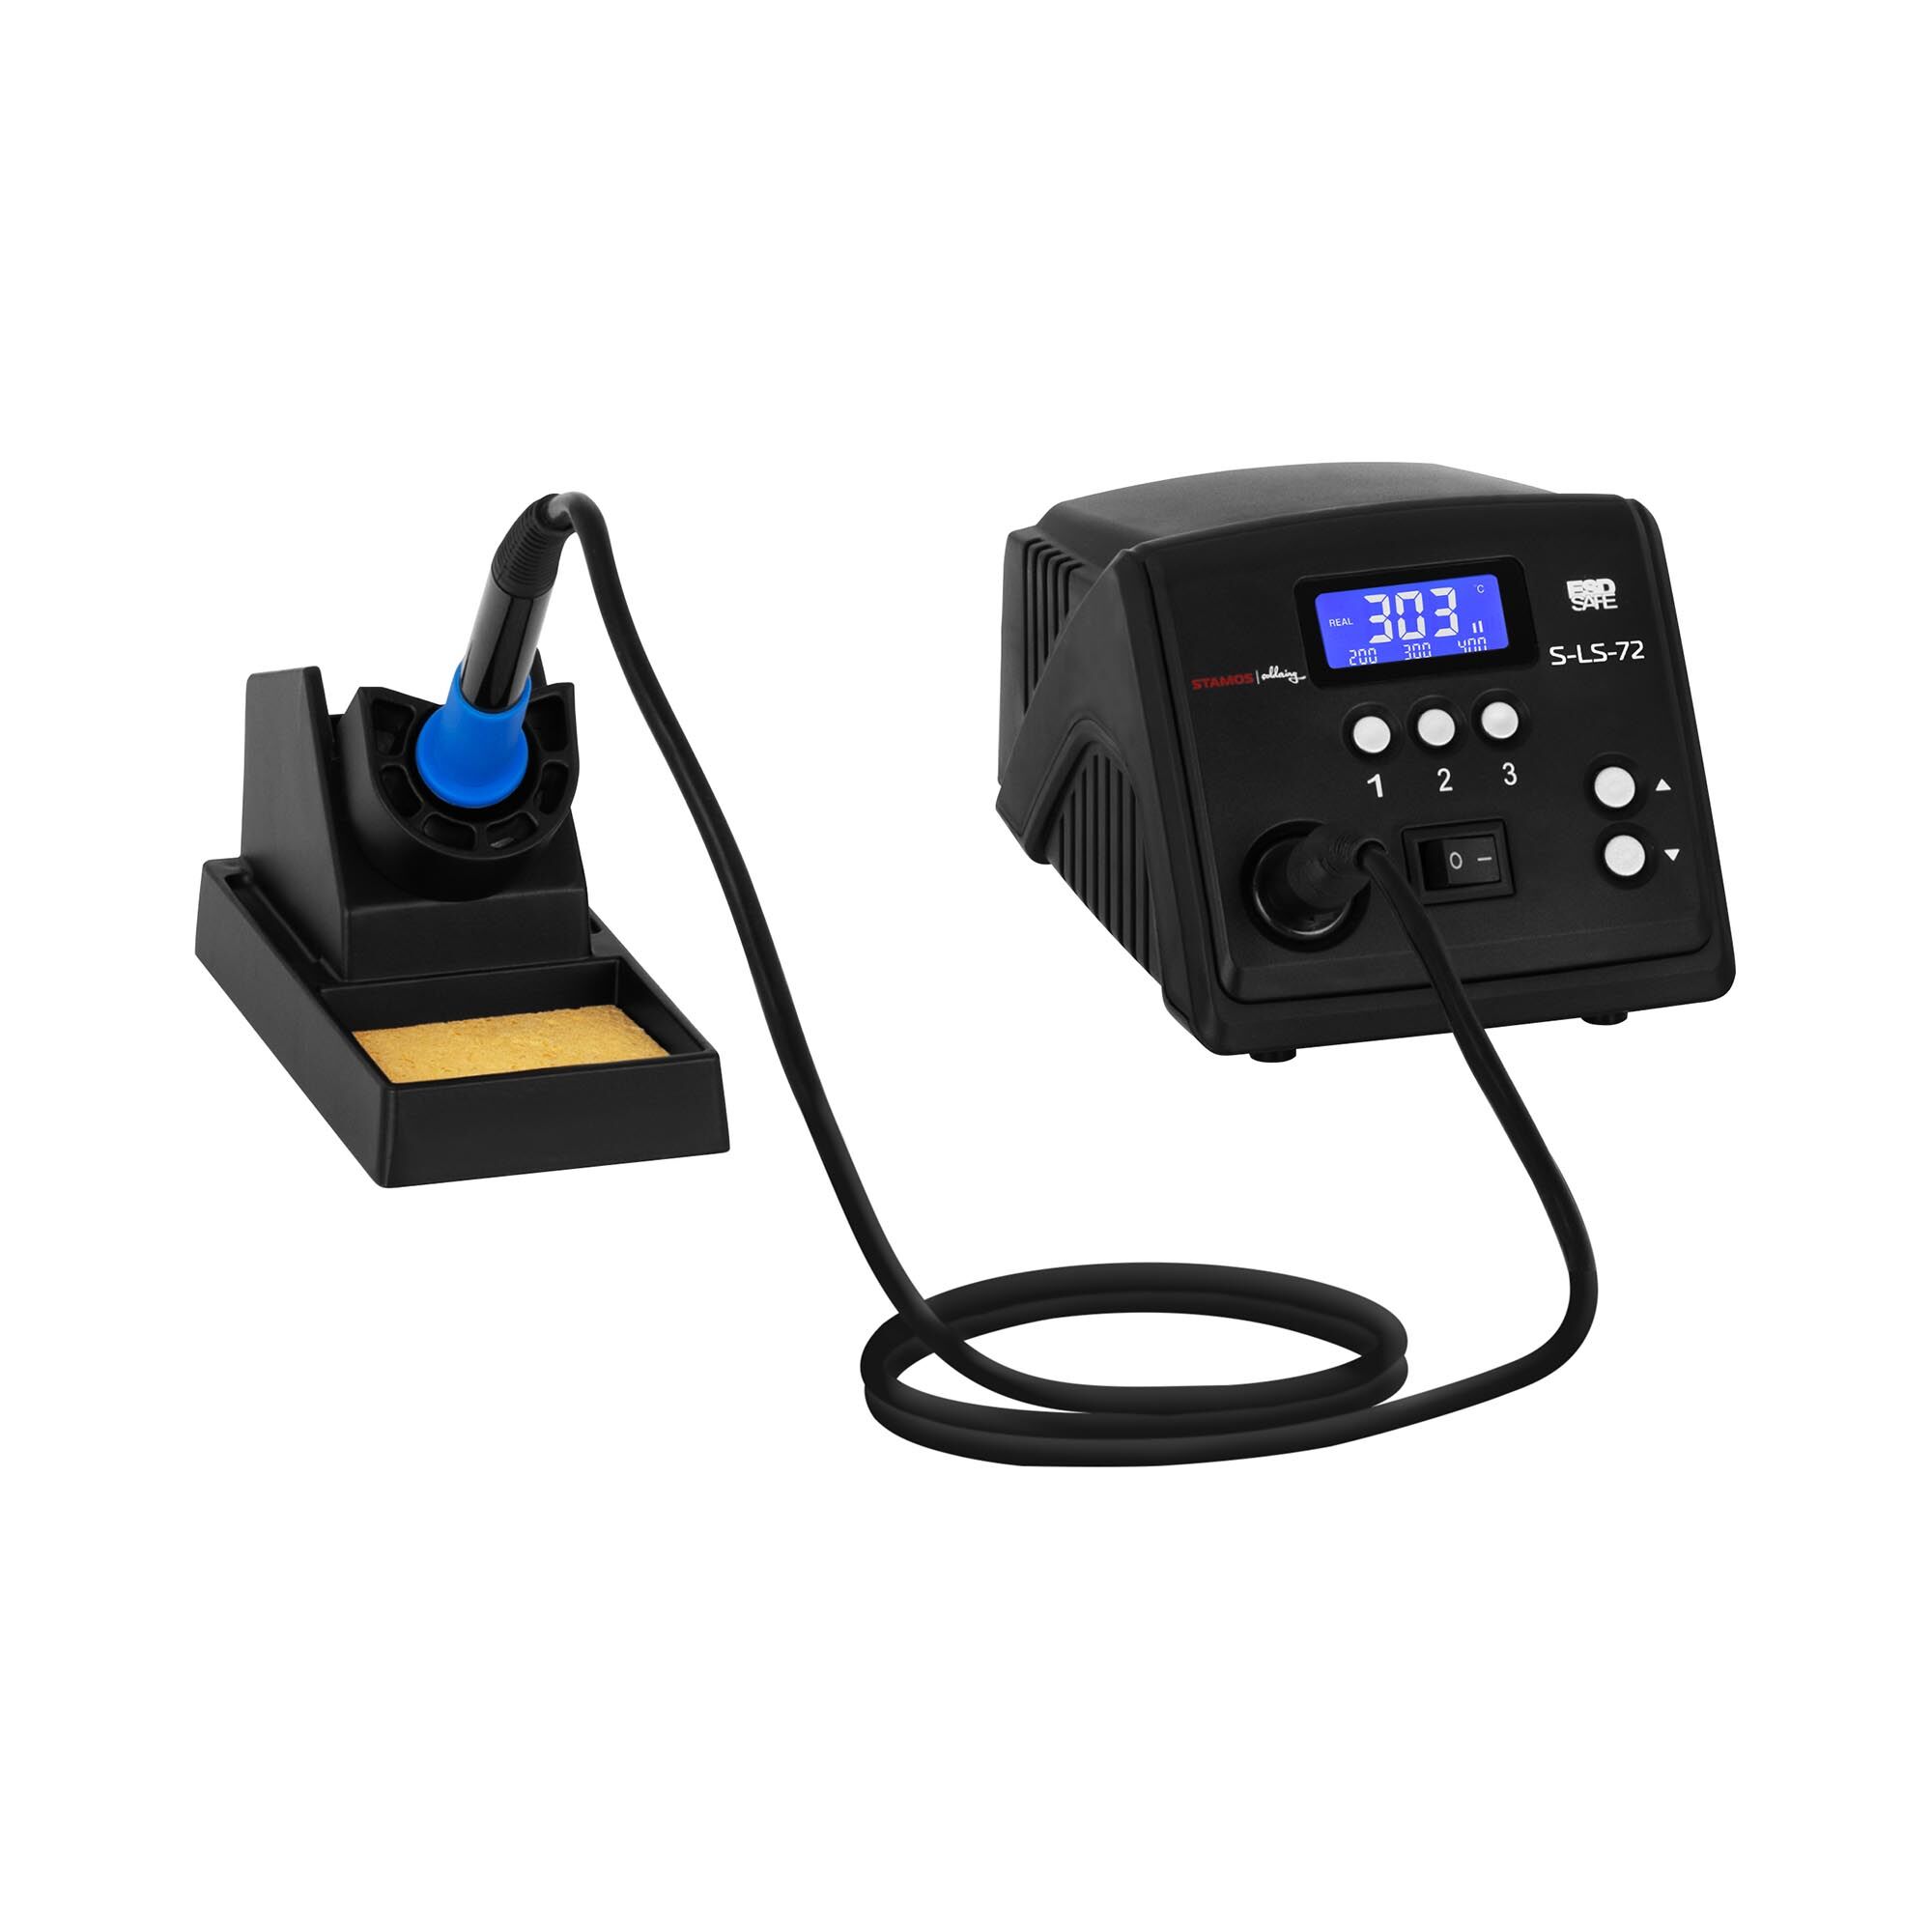 Stamos Soldering Soldering Station - digital - with soldering iron and holder - 90 W - LCD